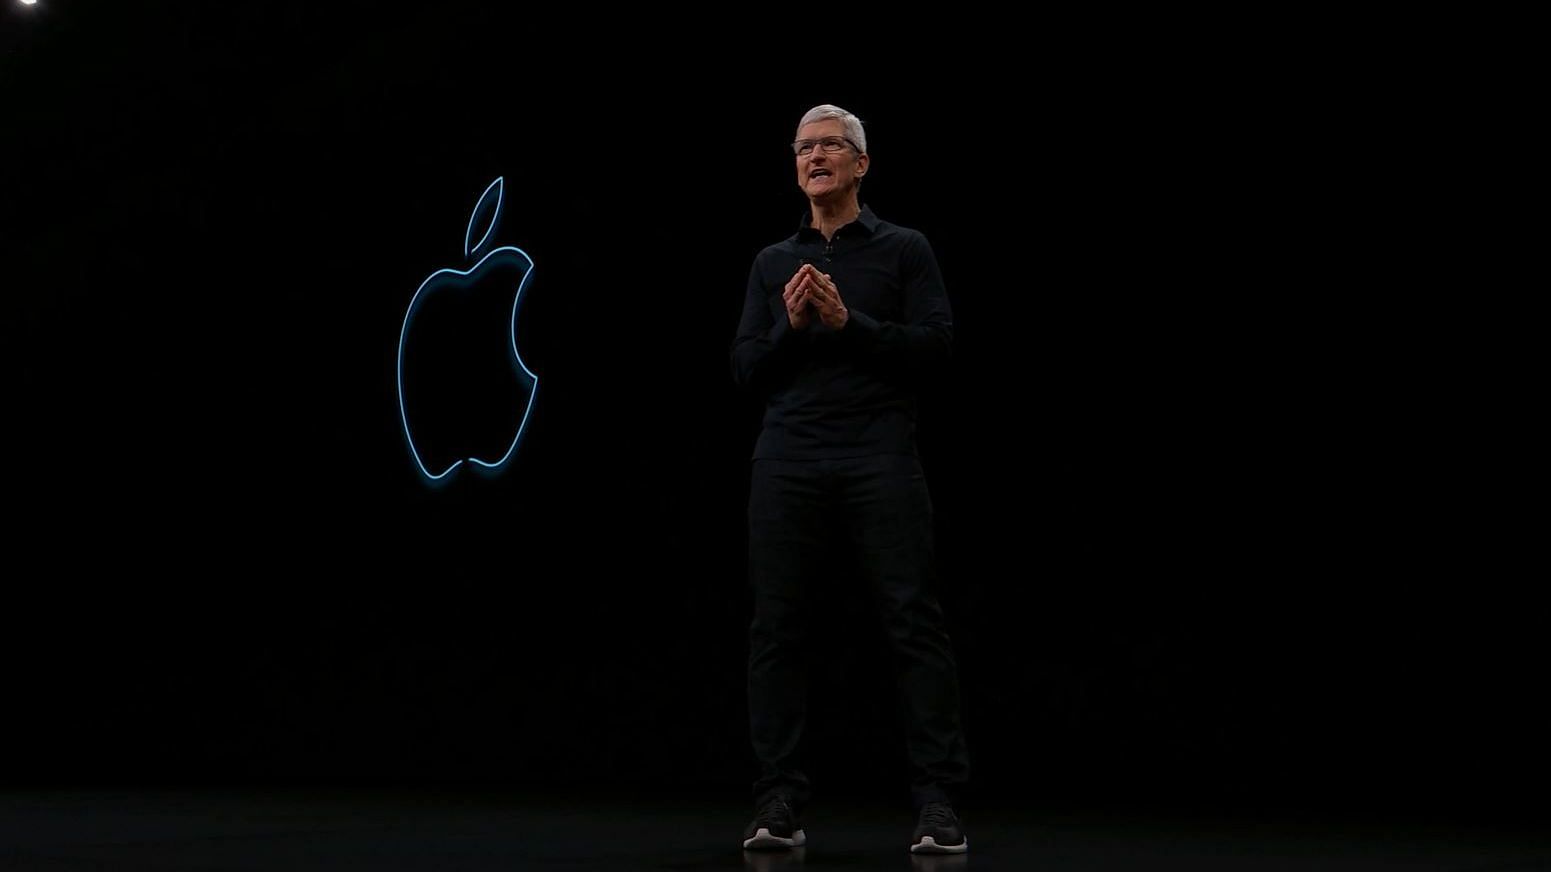 Tim Cook, CEO, Apple at the WWDC 2019 keynote